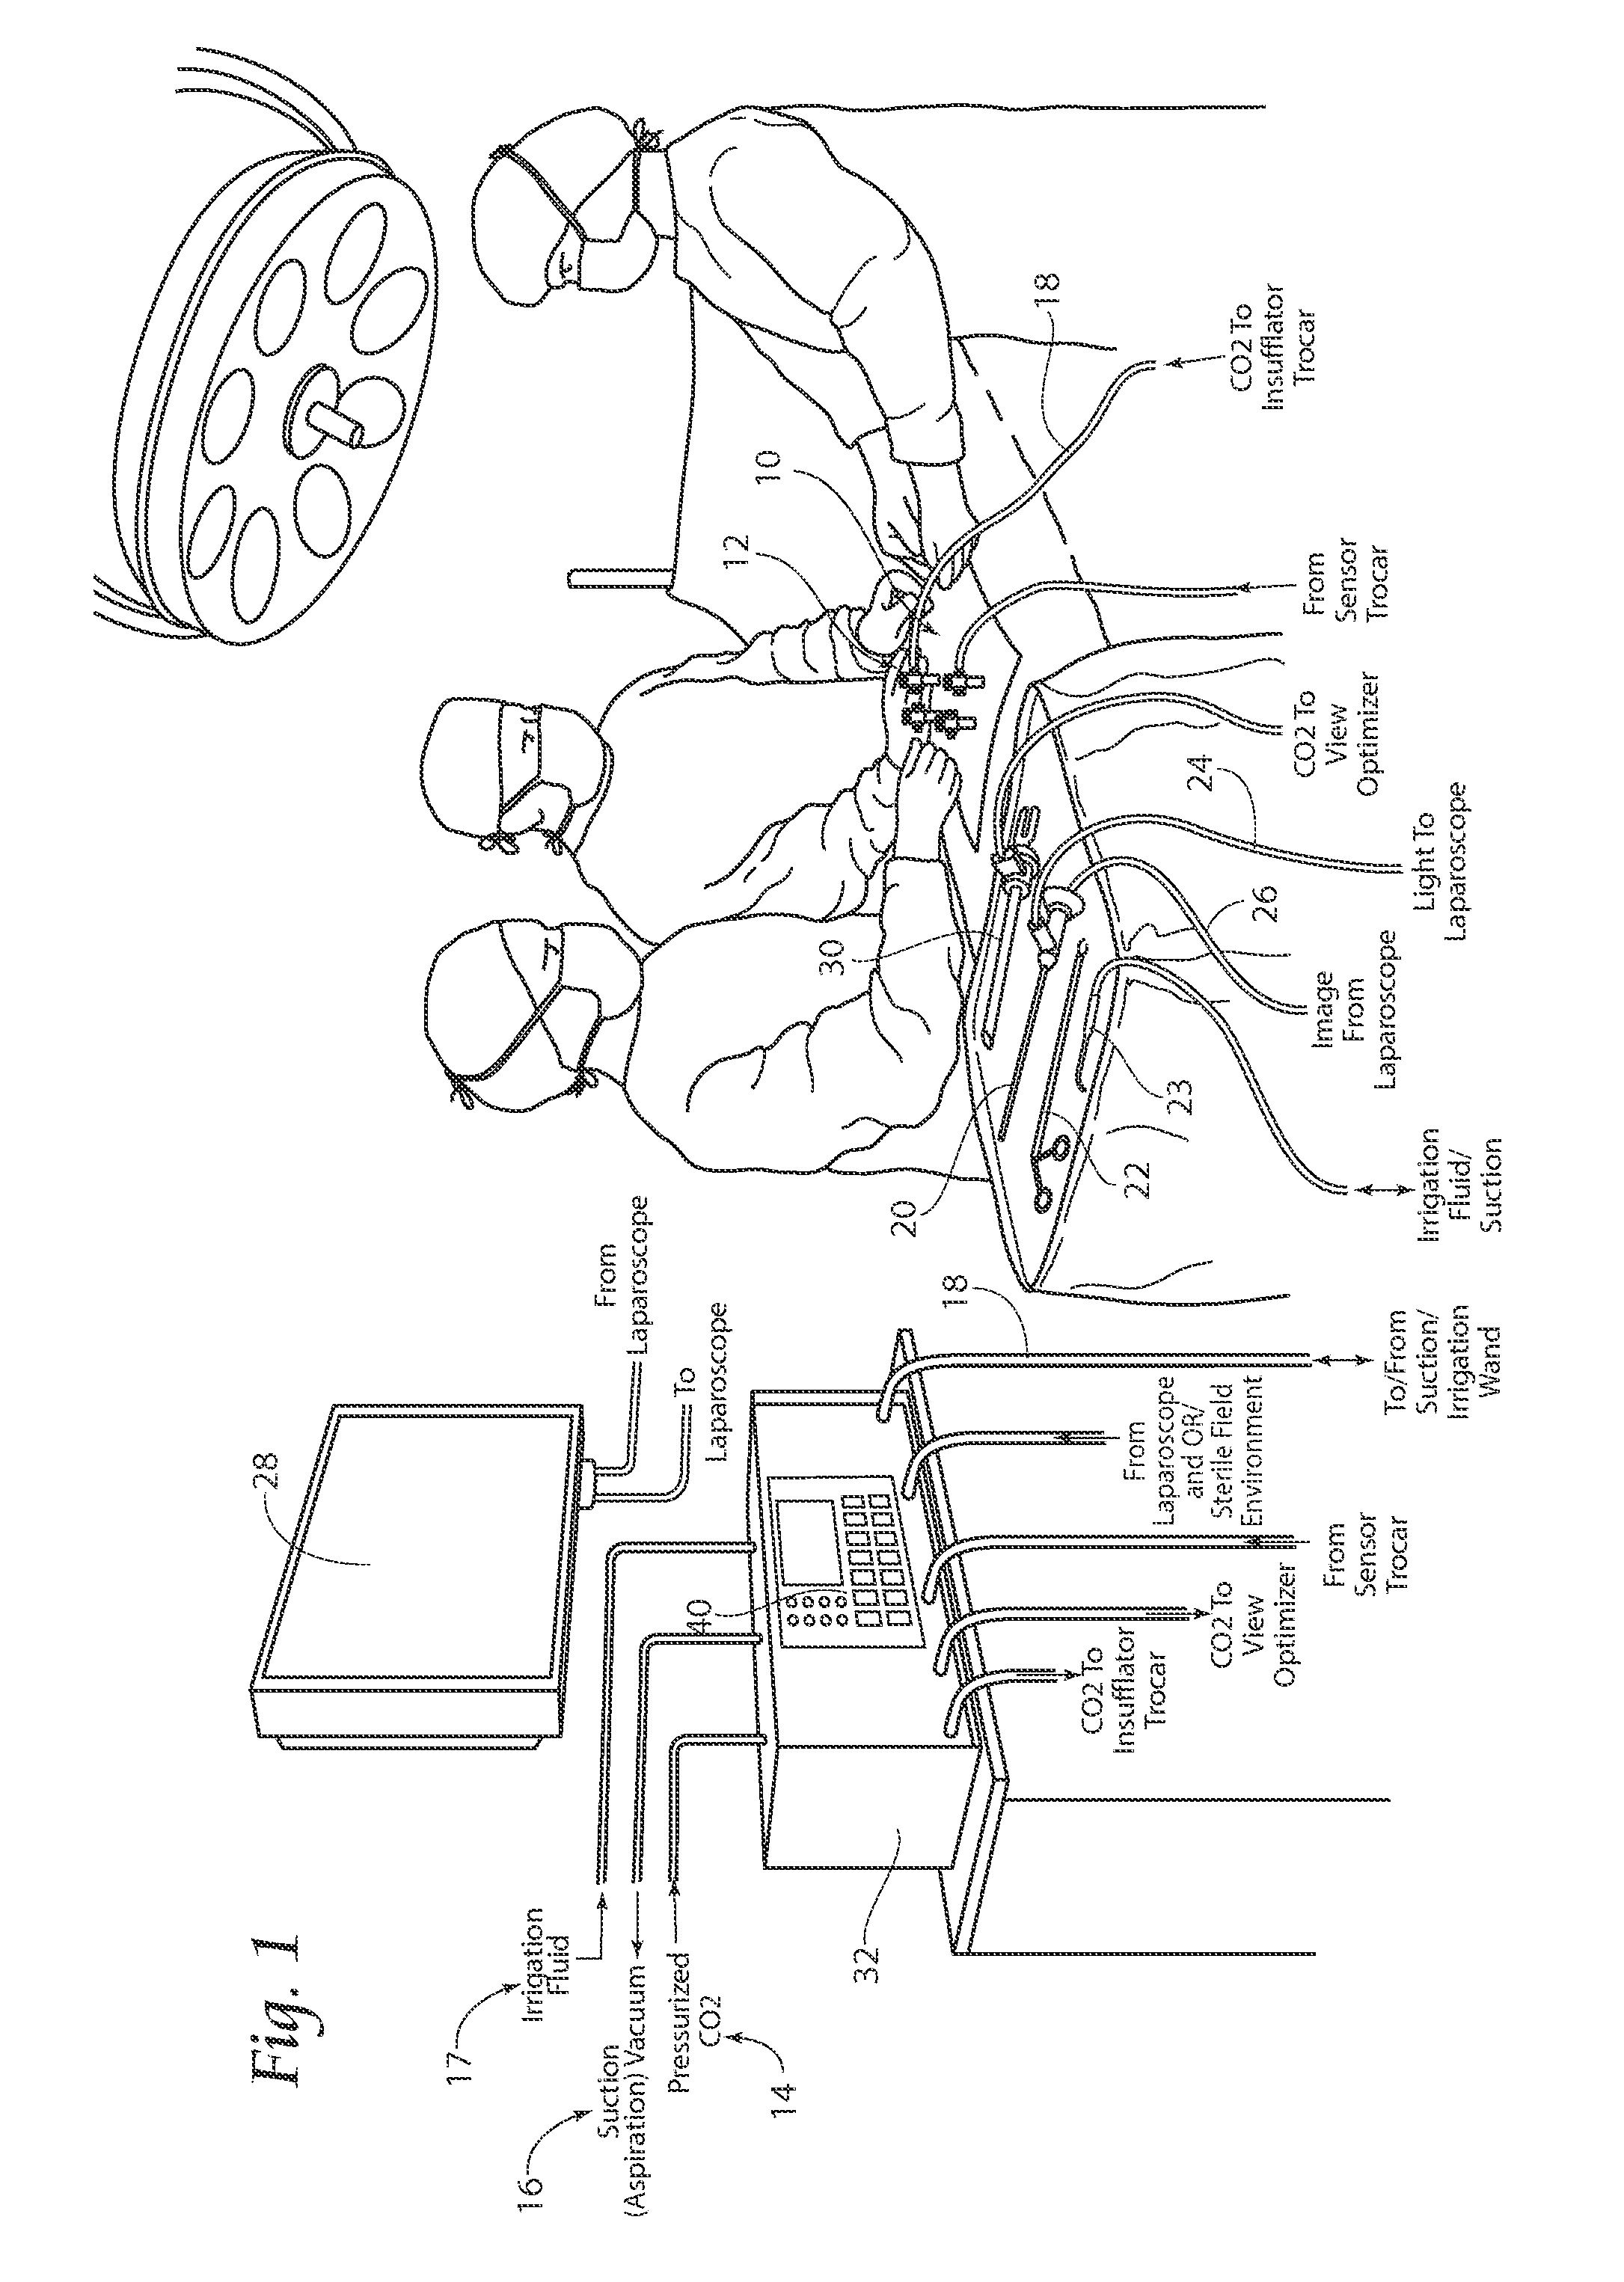 Integrated systems and methods for maintenance and management of an intra-abdominal gas environment during laparoscopic surgery